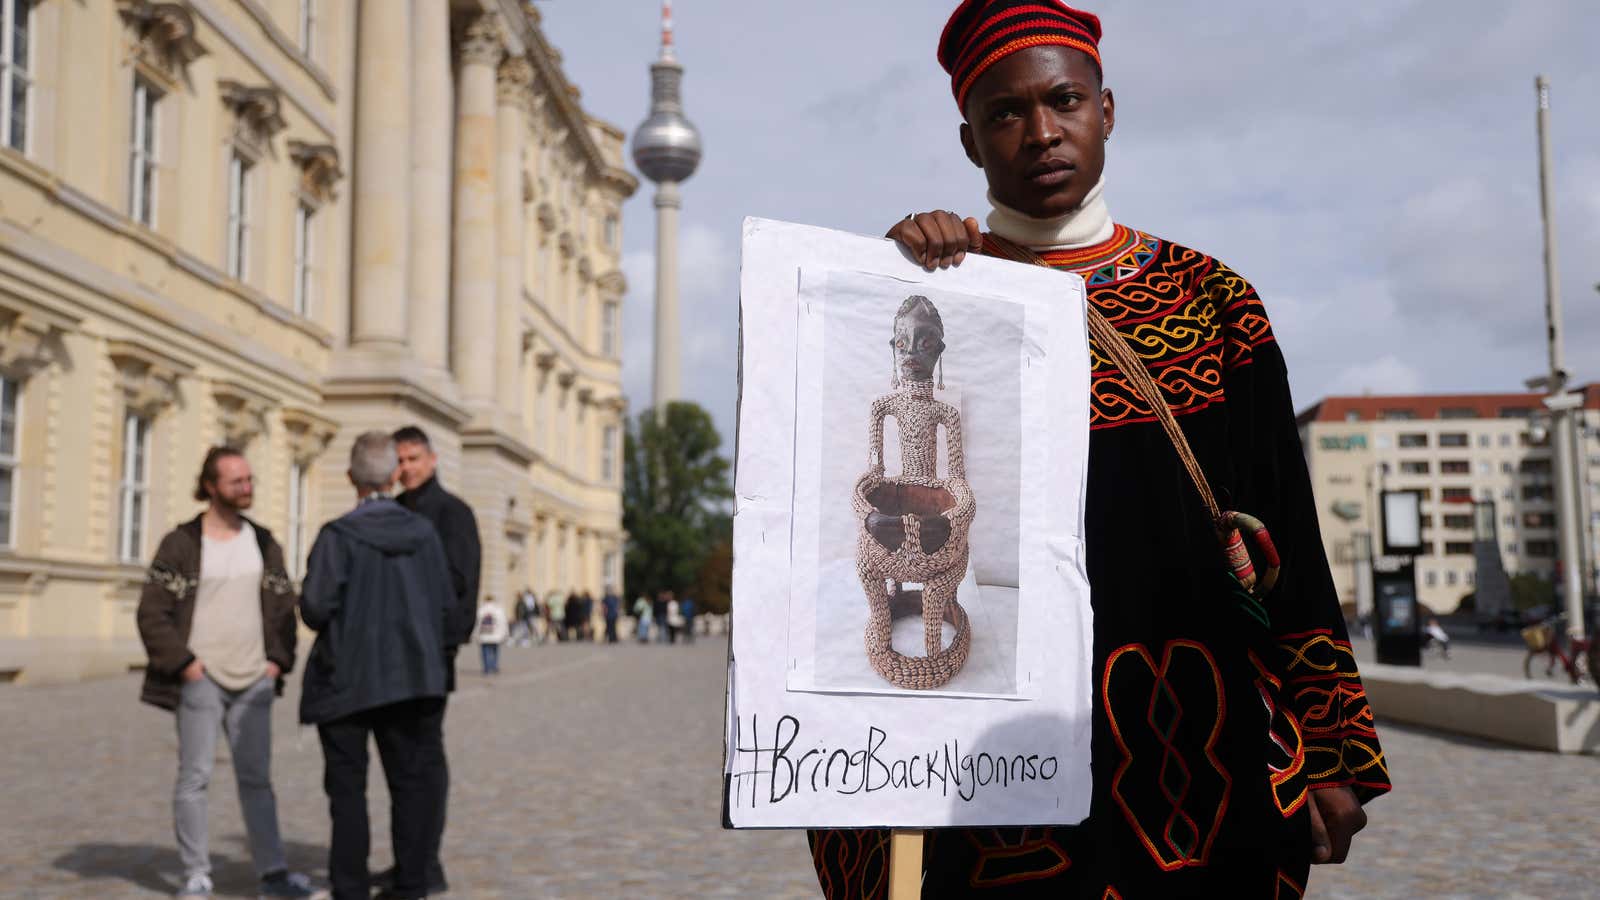 A protester from Cameroon seeking the return of the Ngonnso statue stands outside the Humboldt Forum